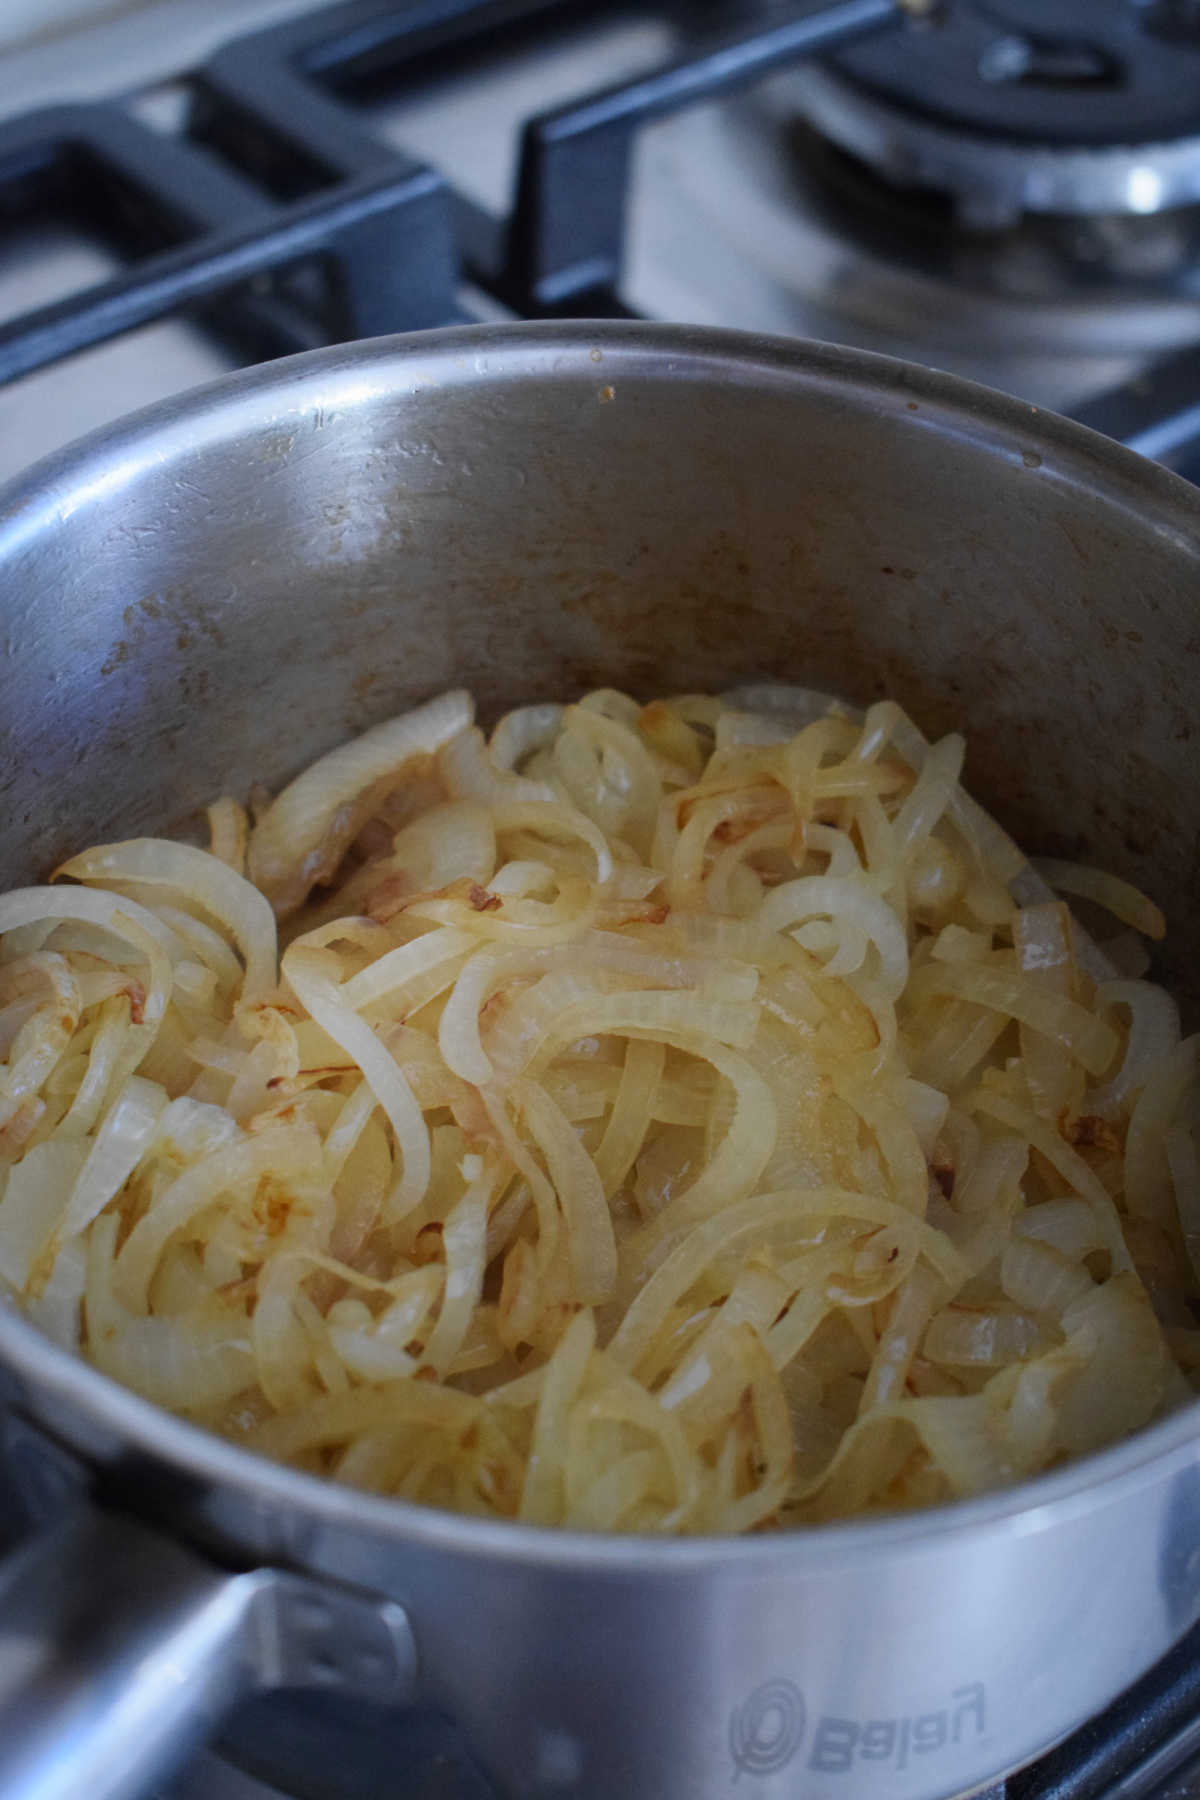 Cooking onions in a saucepan.